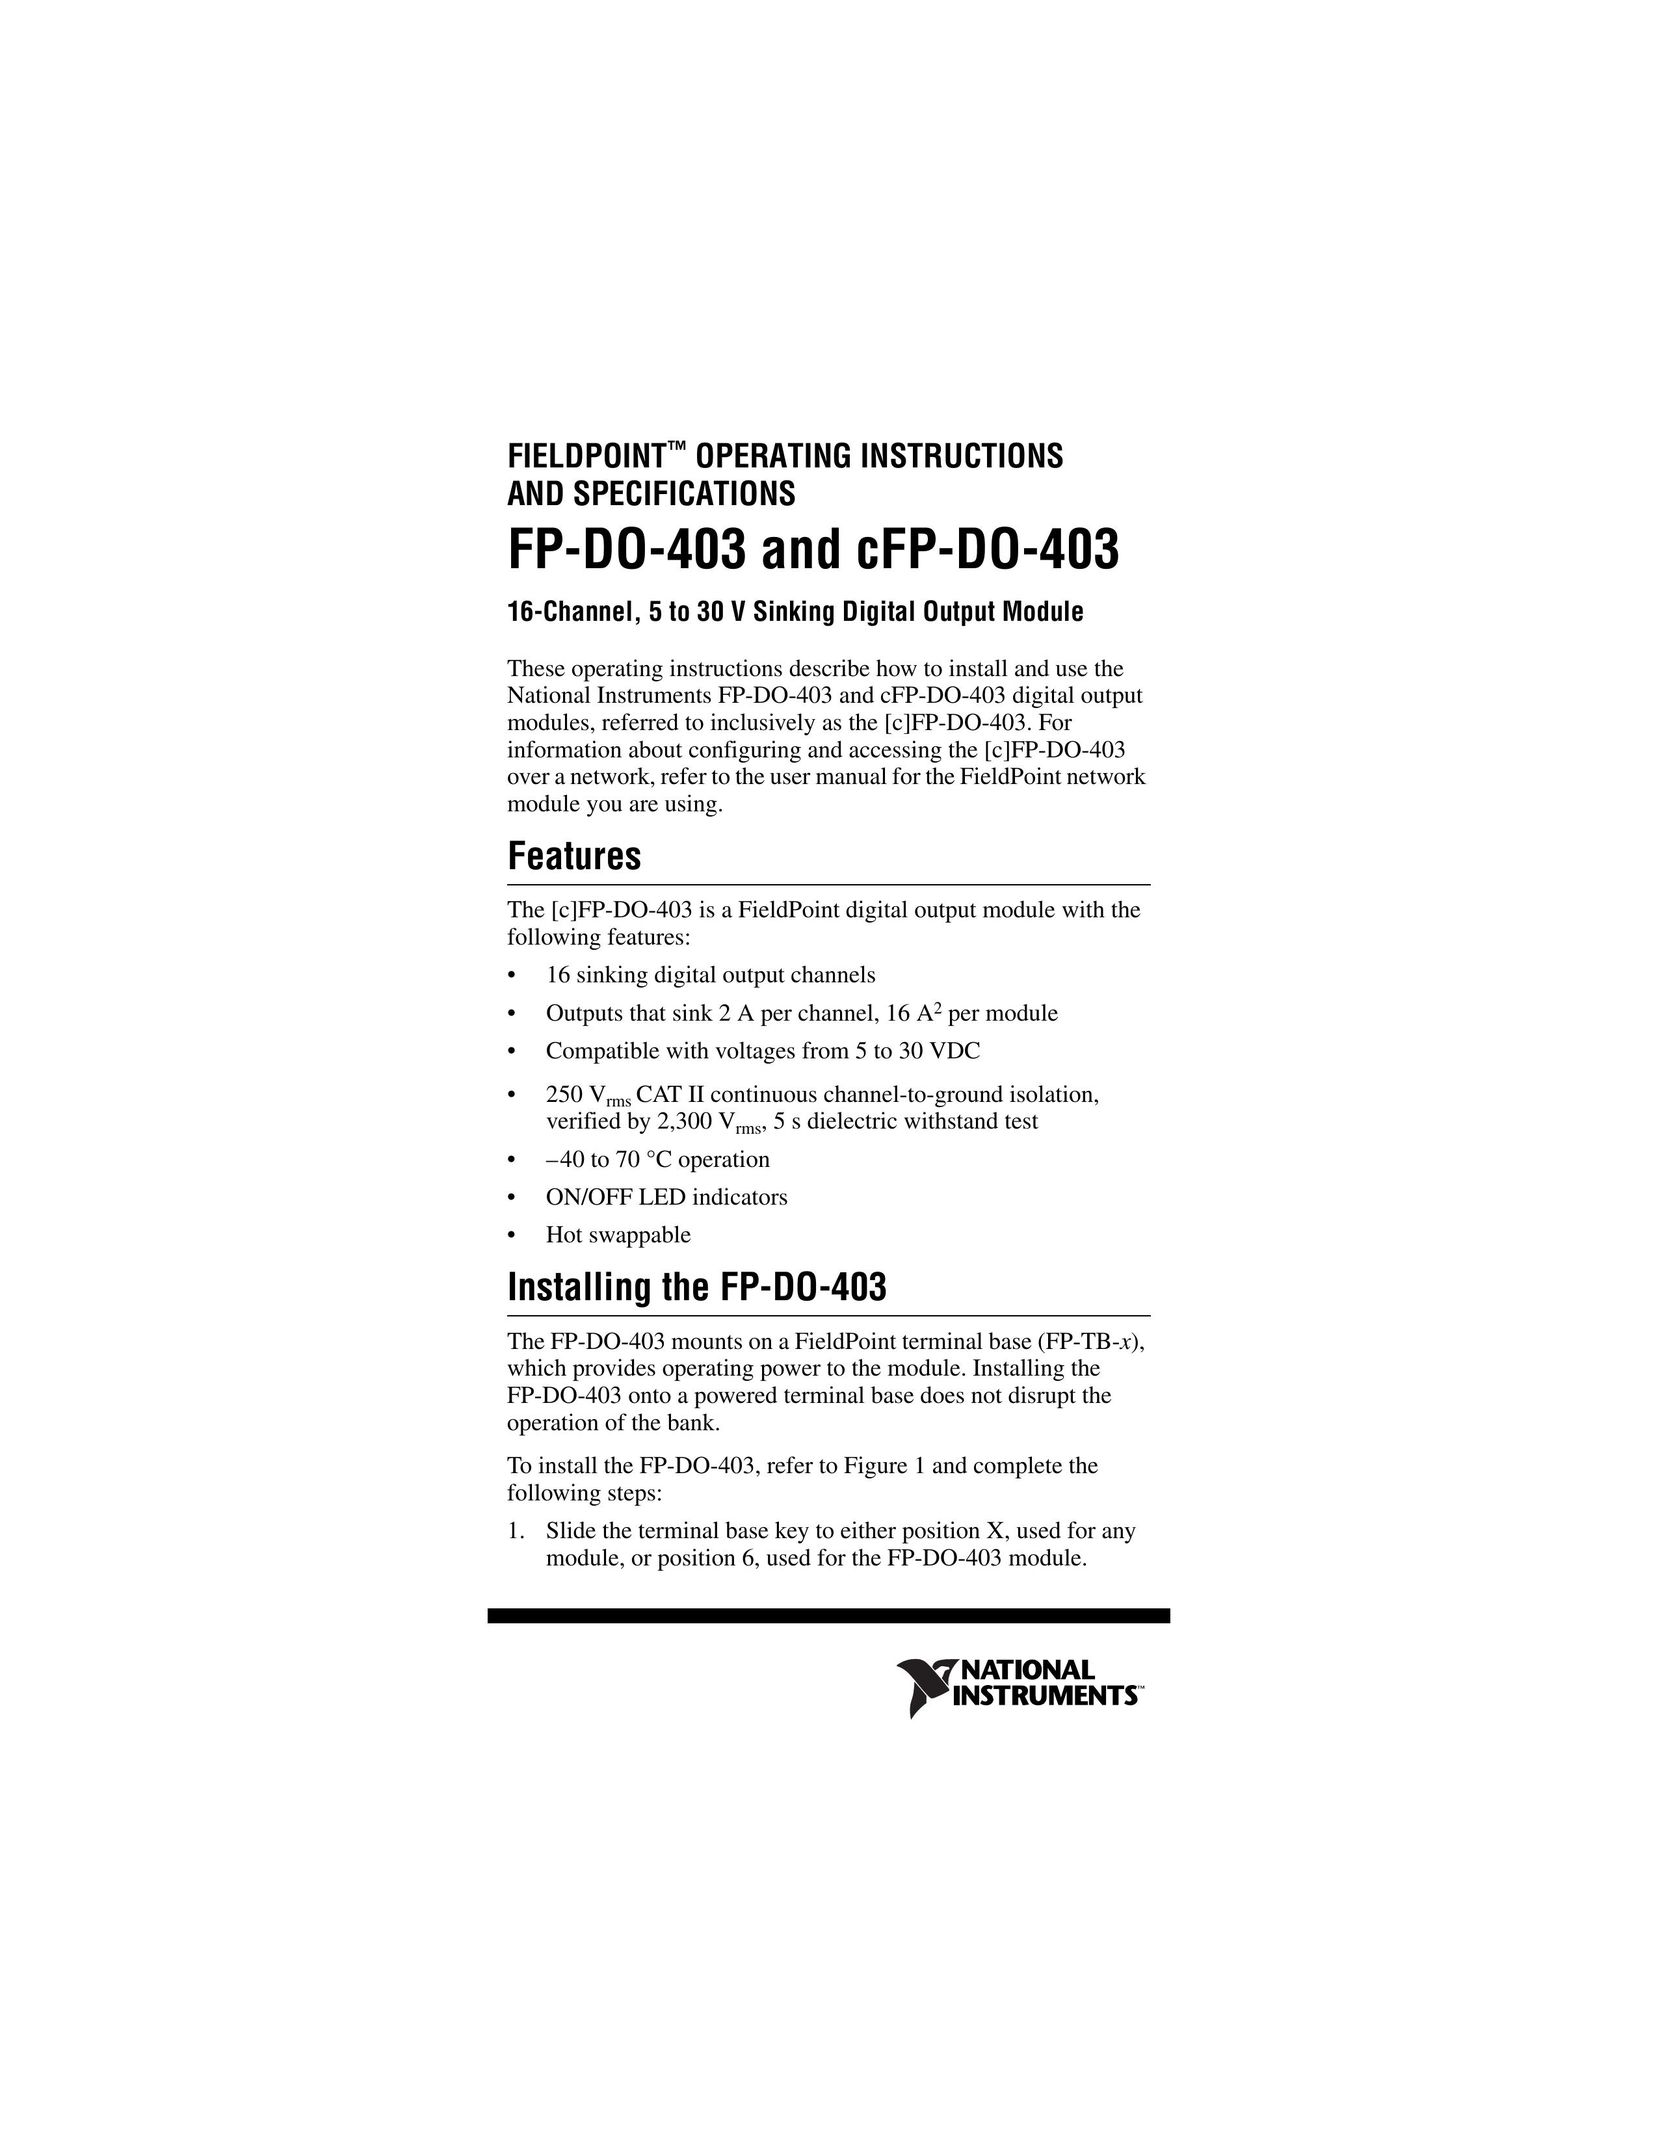 National Instruments FP-DO-403 Network Router User Manual